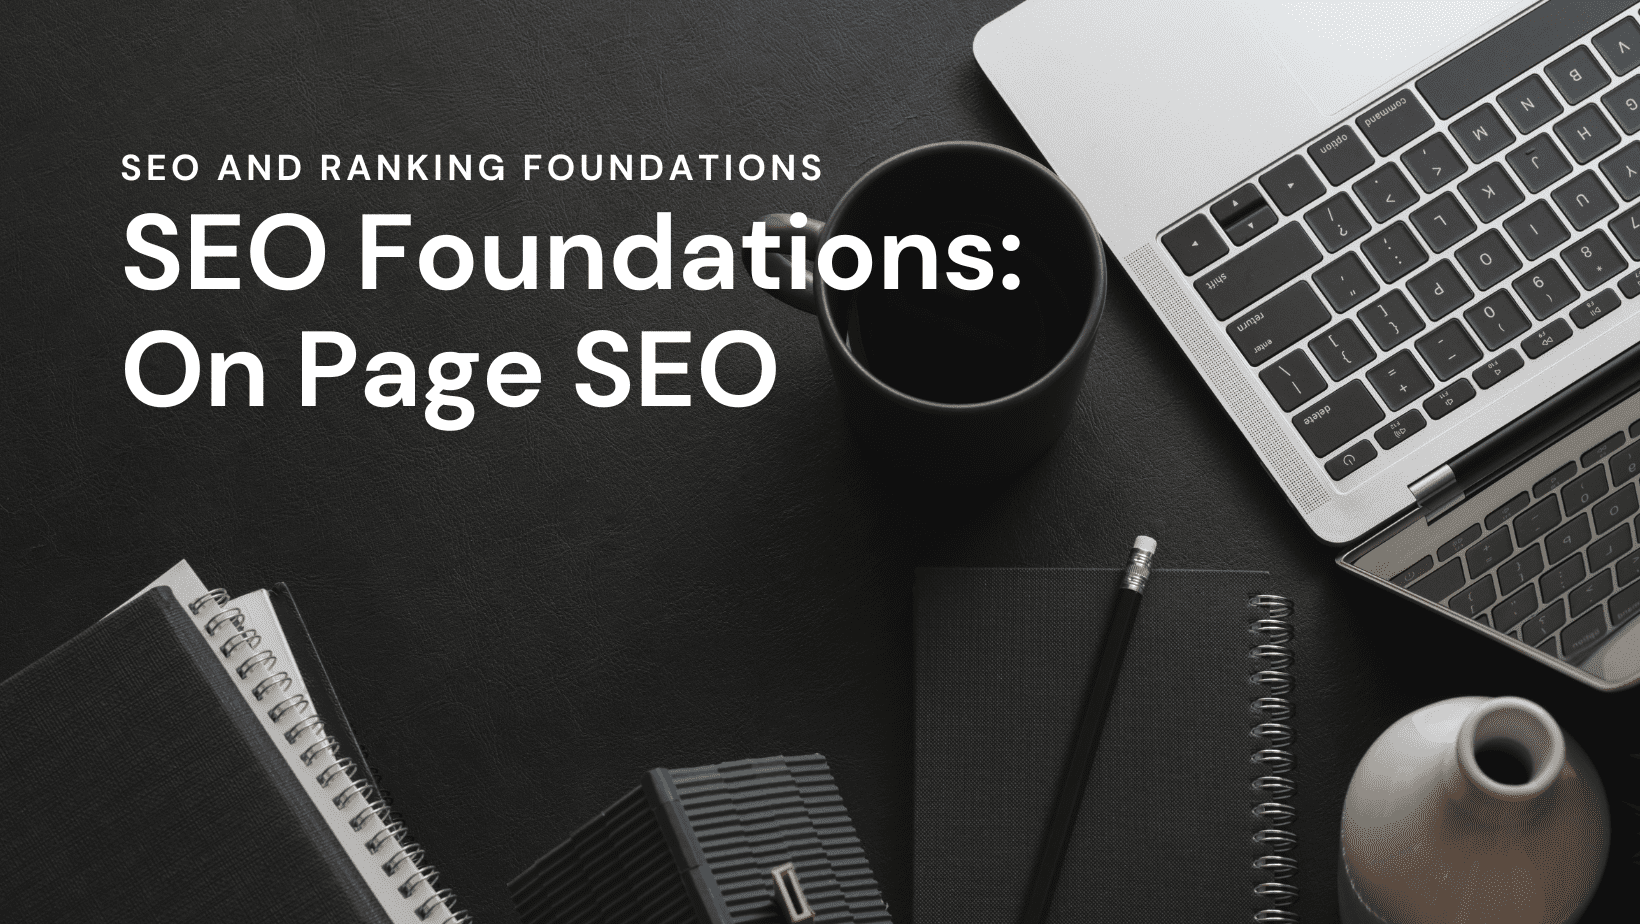 SEO Foundations: On Page SEO